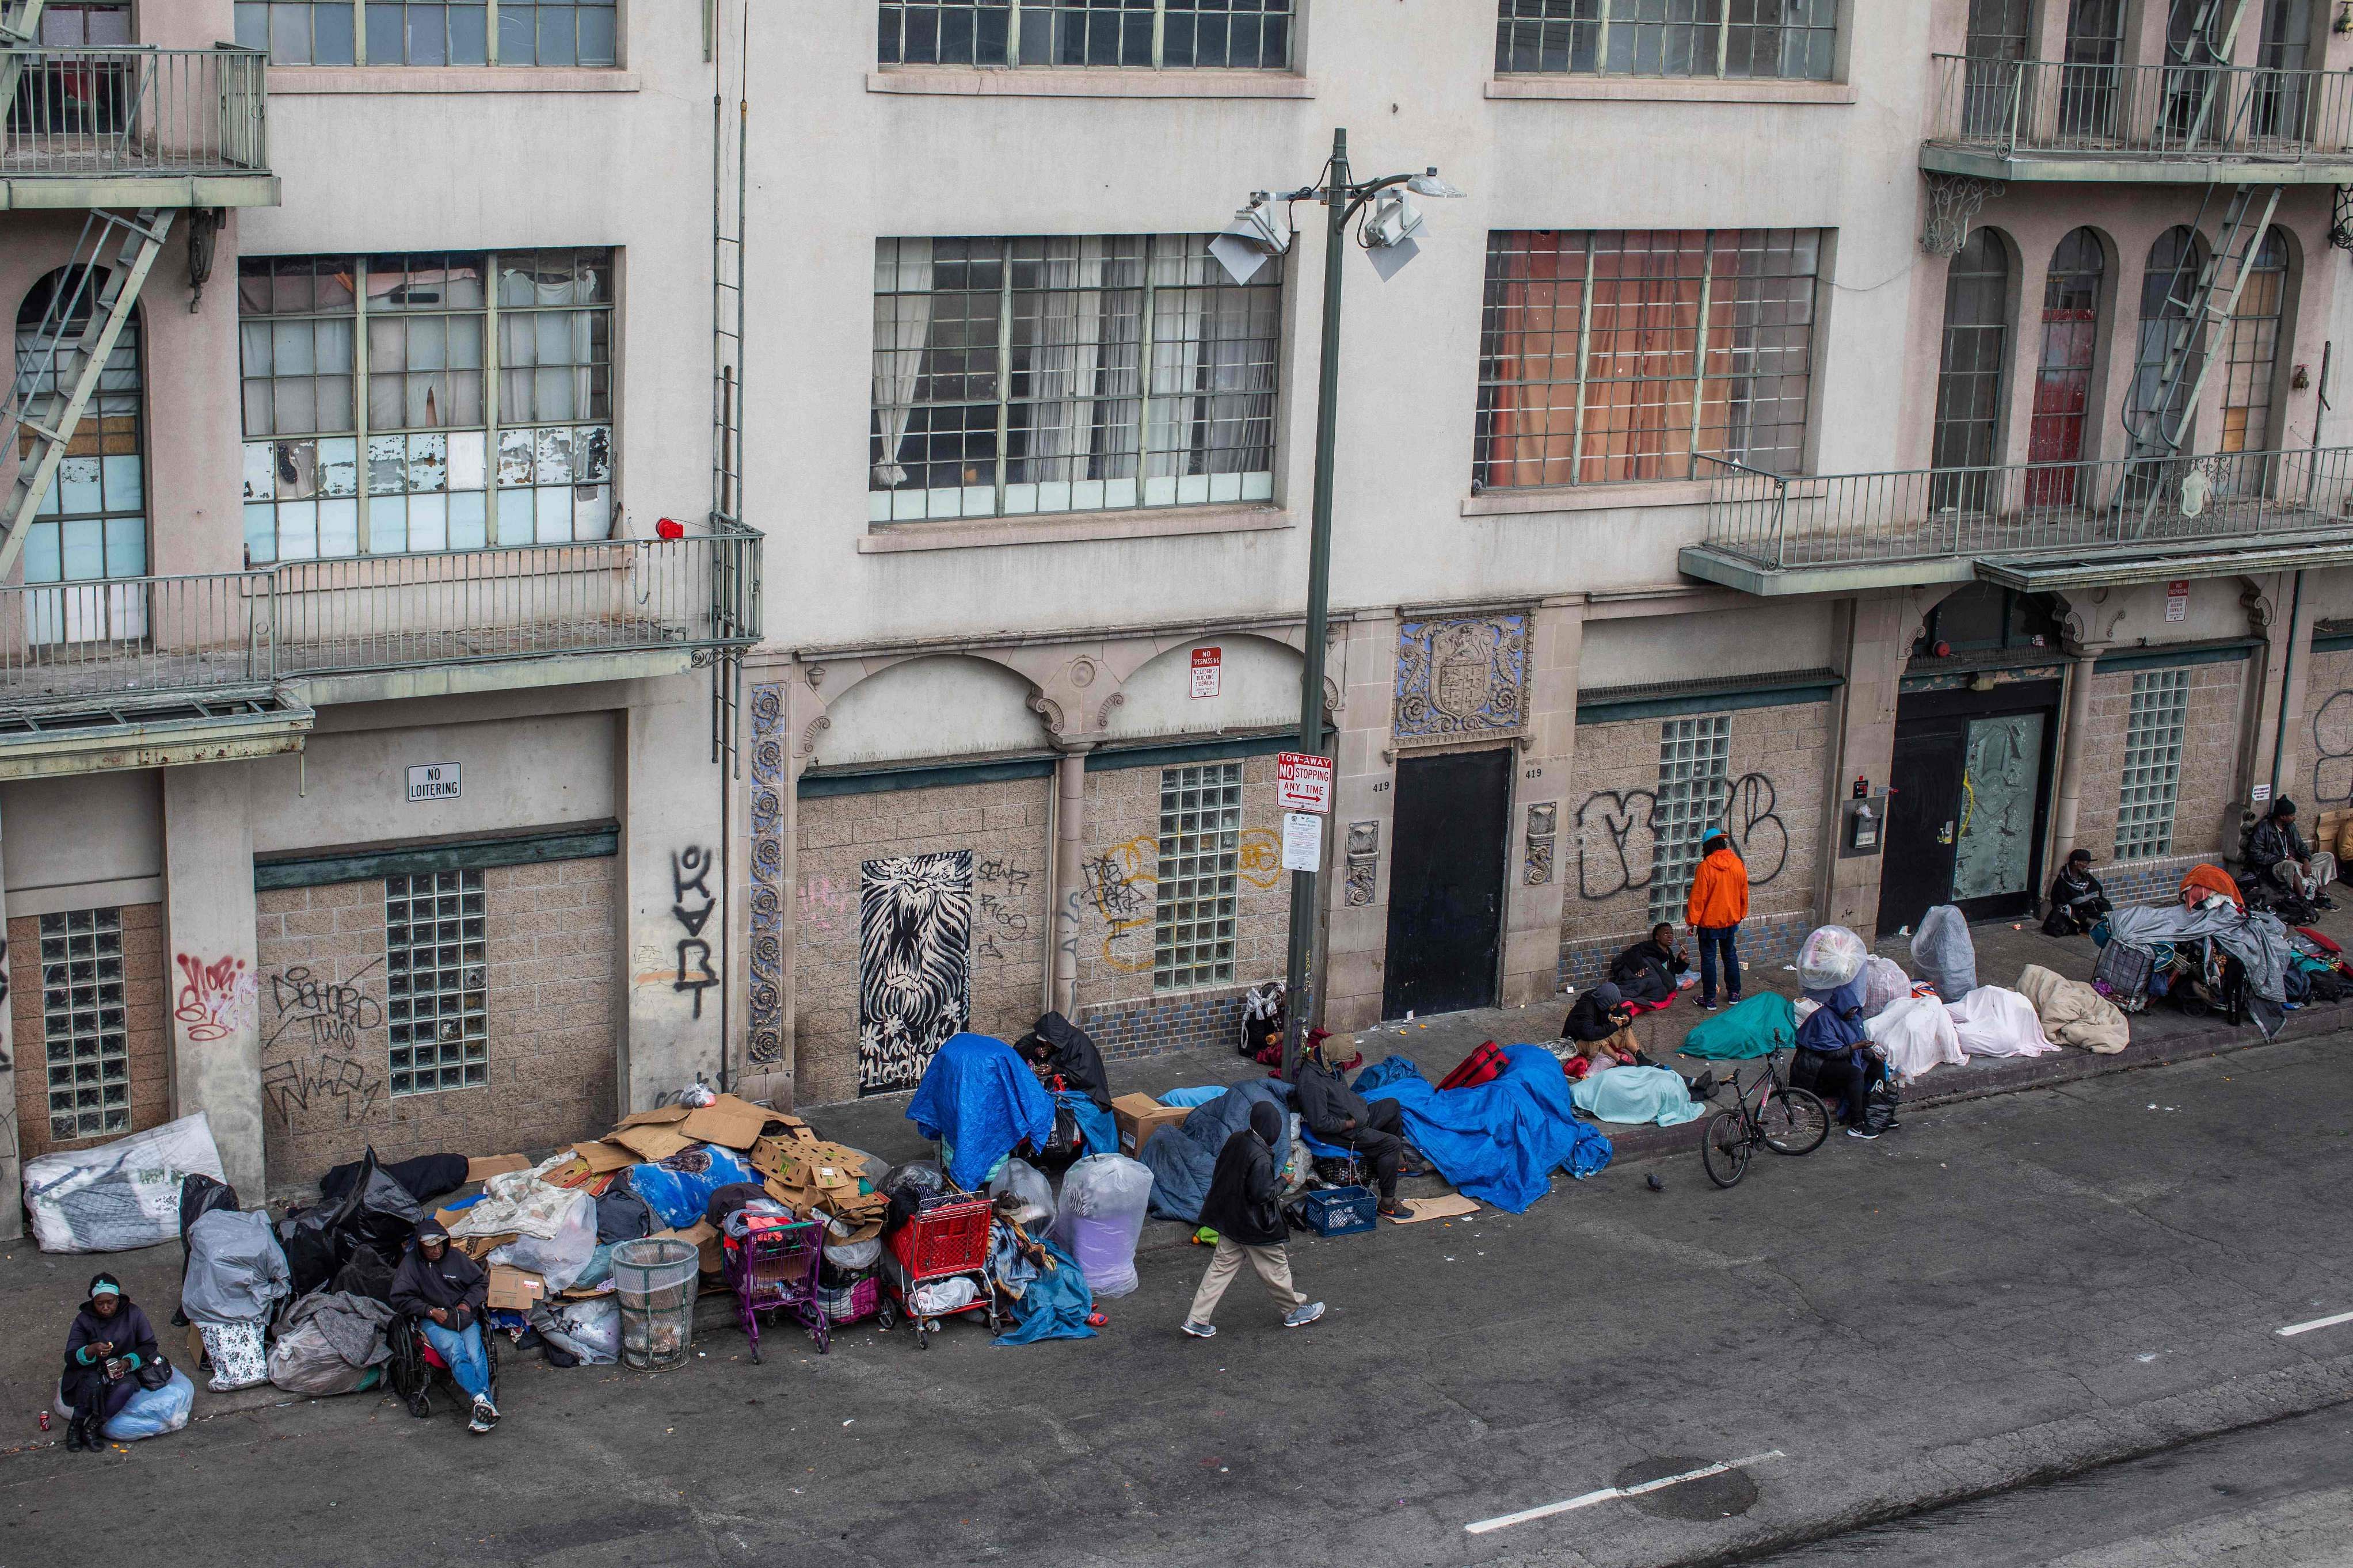 homeless people make shelters on the sidewalk in front of the Midnight Mission at Skid Row in downtown Los Angeles, California. (Credit: AFP)